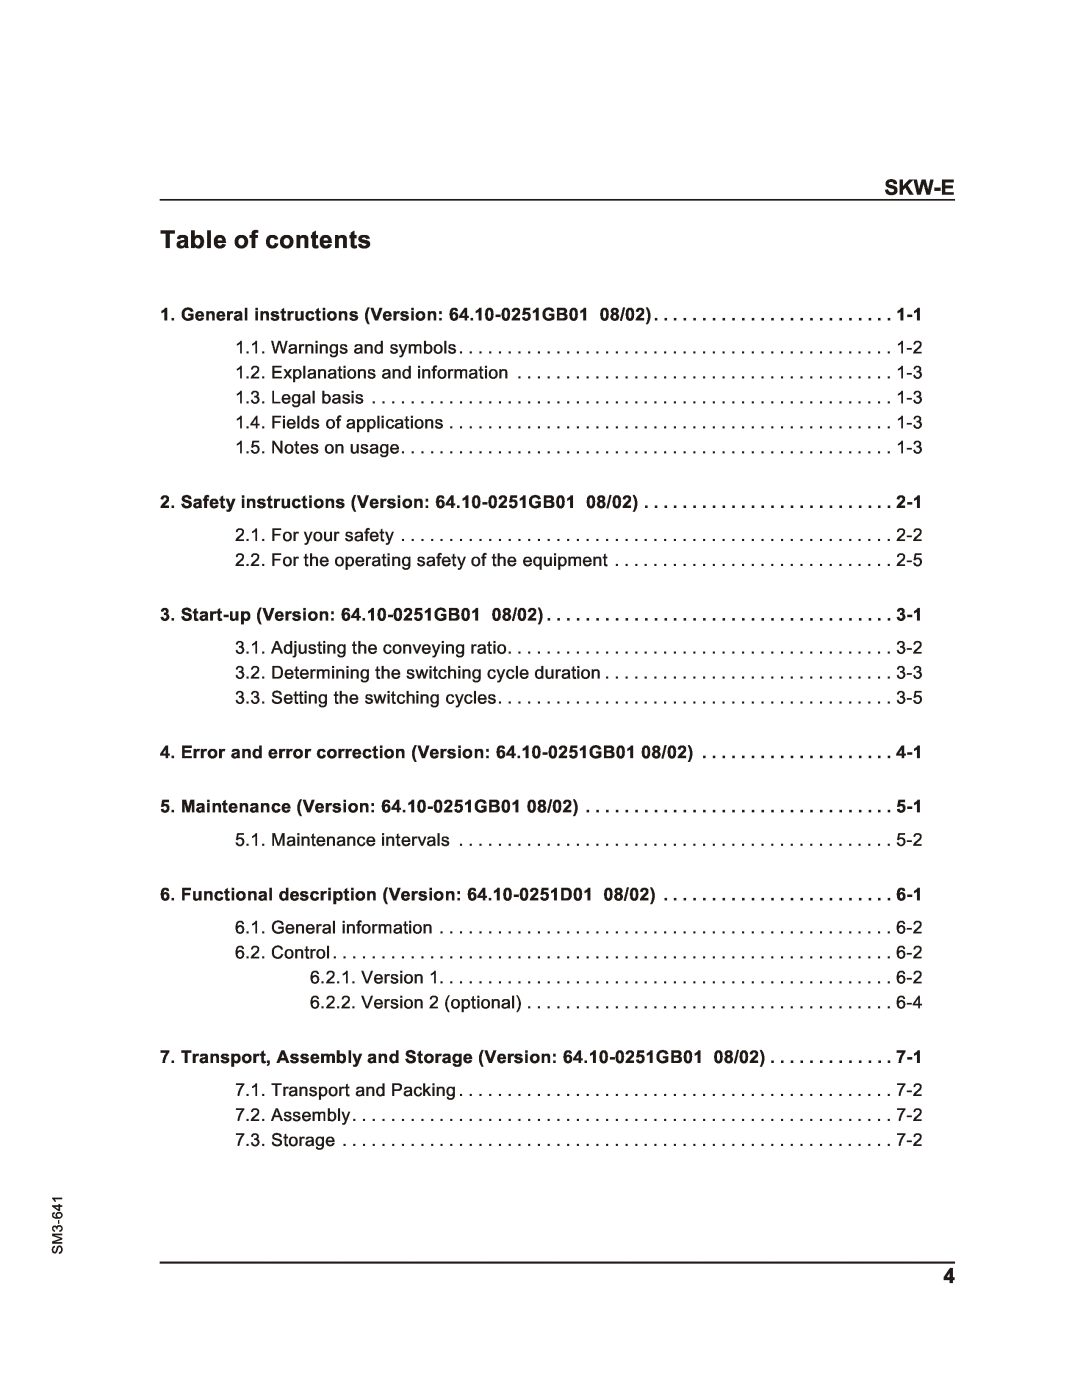 Sterling Plumbing SKW-E manual Table of contents, Skw-E 